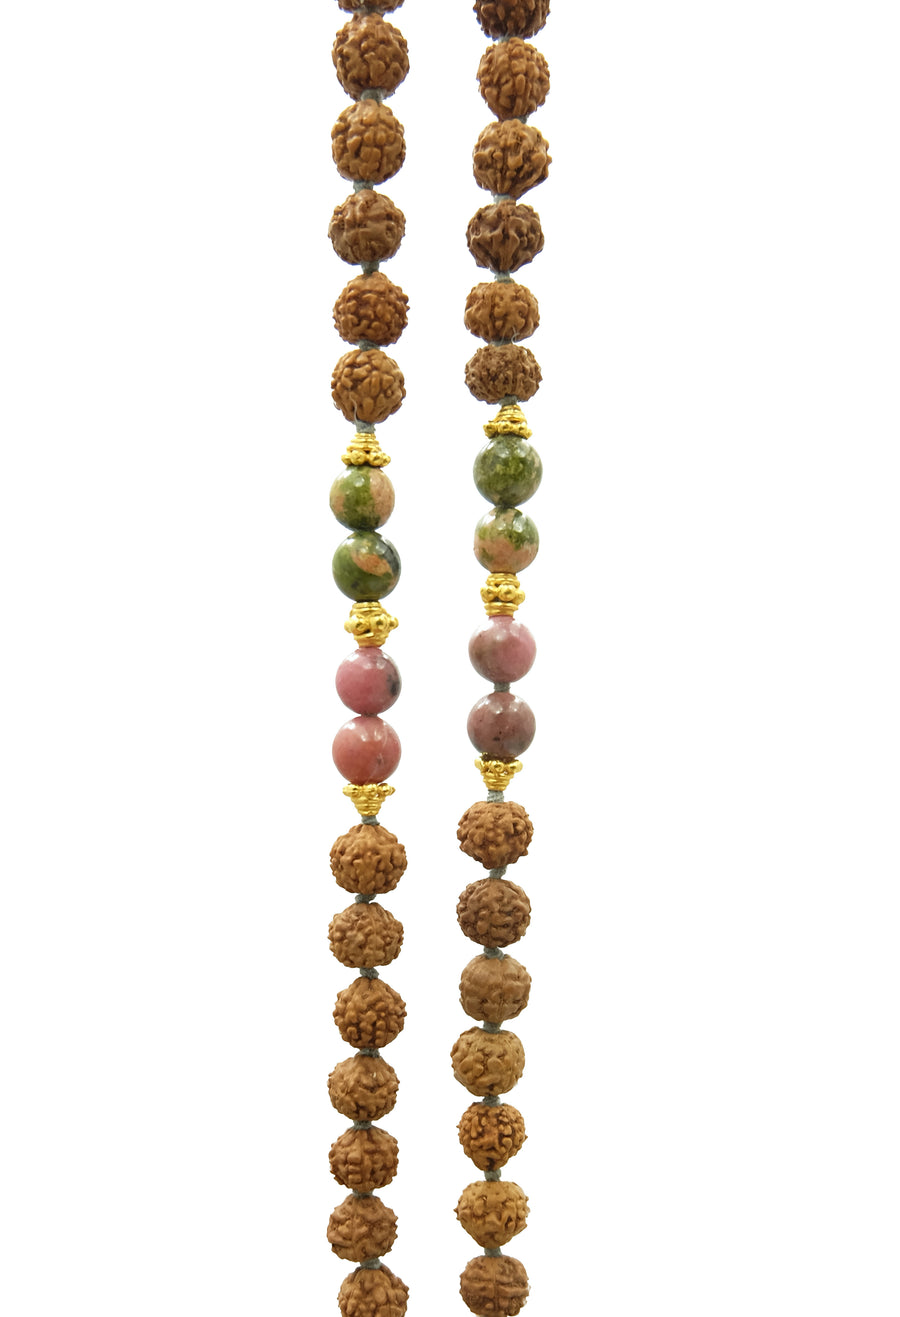 An image of a 108 prayer bead mala necklace crafted with Rudraksha, Jasper, and Rhodonite gemstones, exuding natural beauty and spiritual energy.